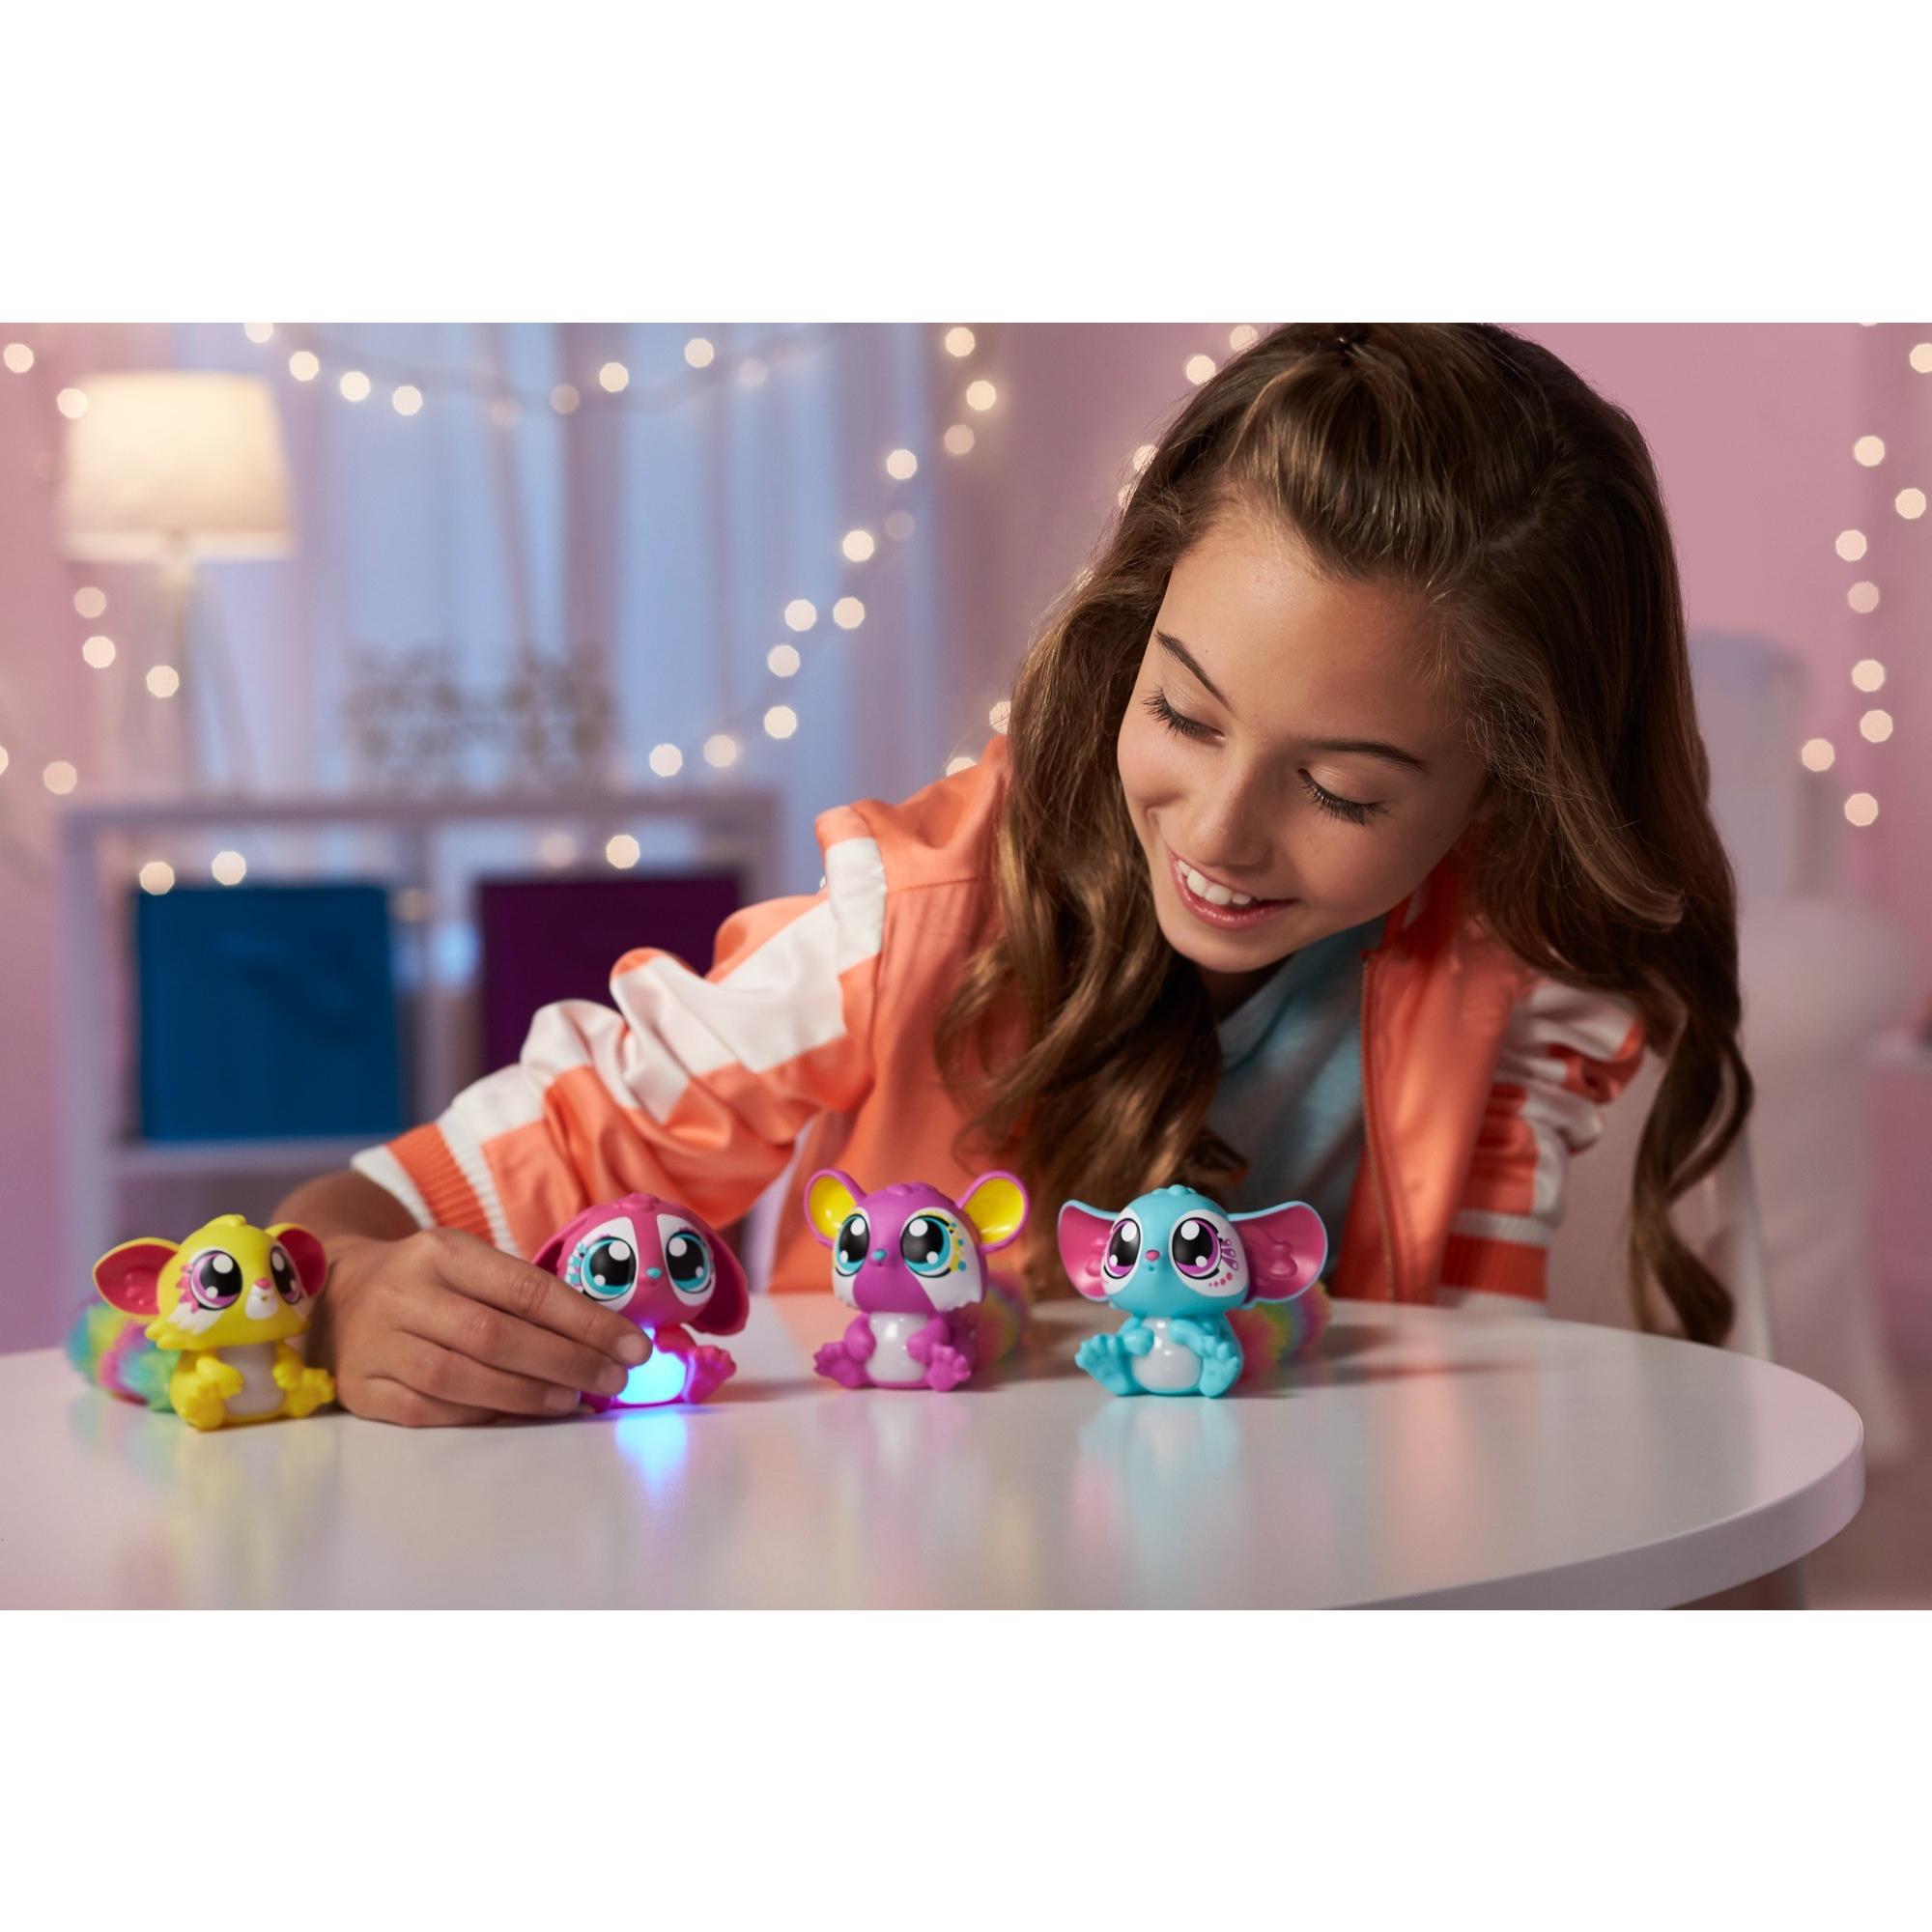 Lil' Gleemerz Babies Interactive Light-Up Figure (Styles May Vary) - image 11 of 18